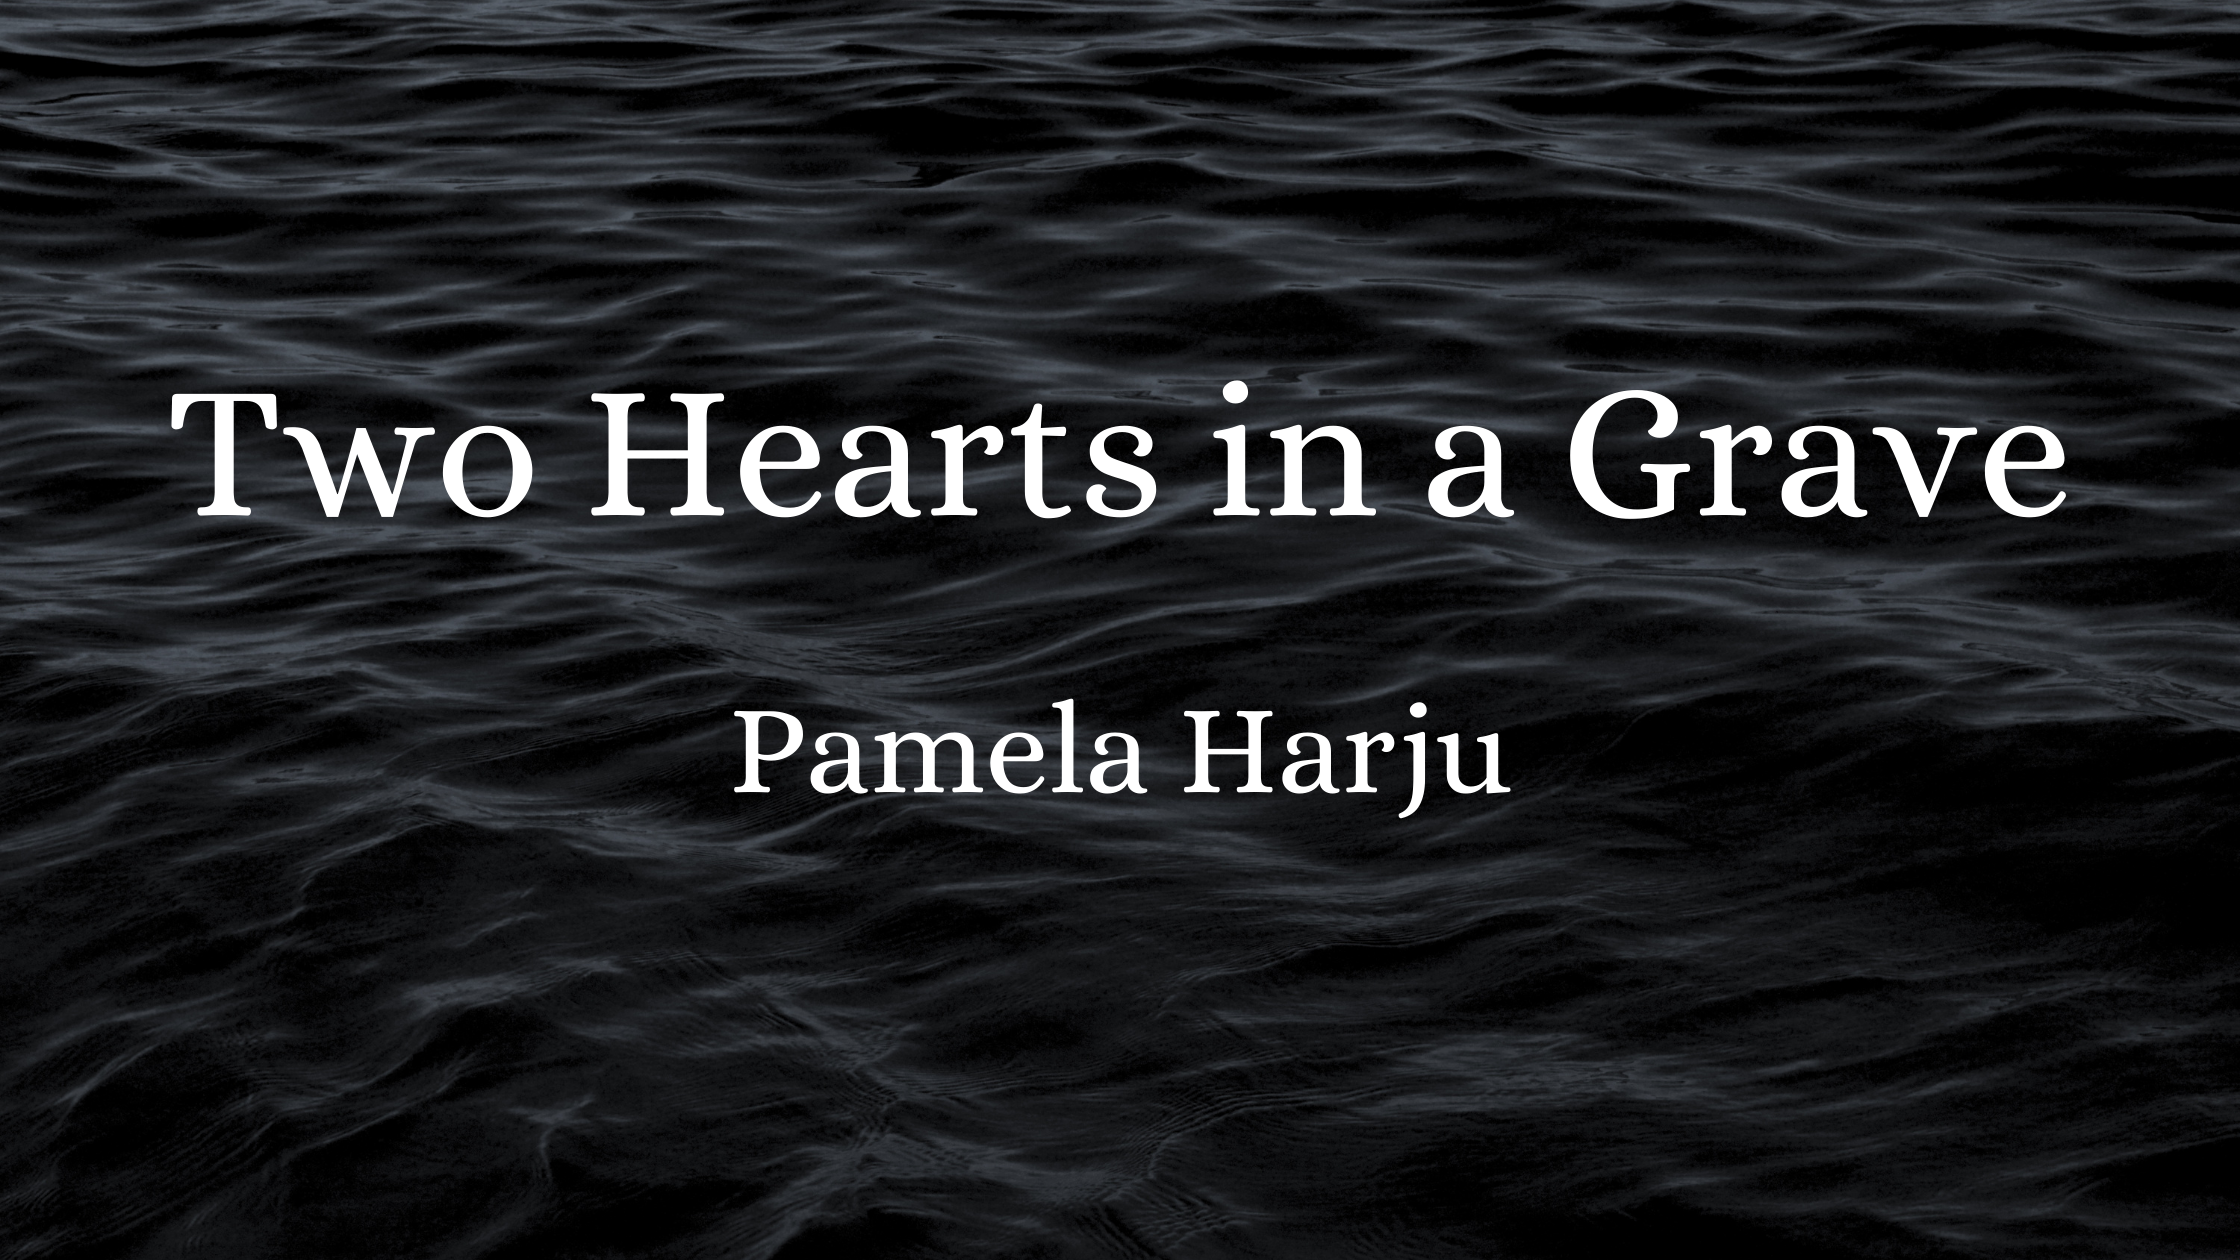 Book Review: Two Hearts in a Grave by Pamela Harju